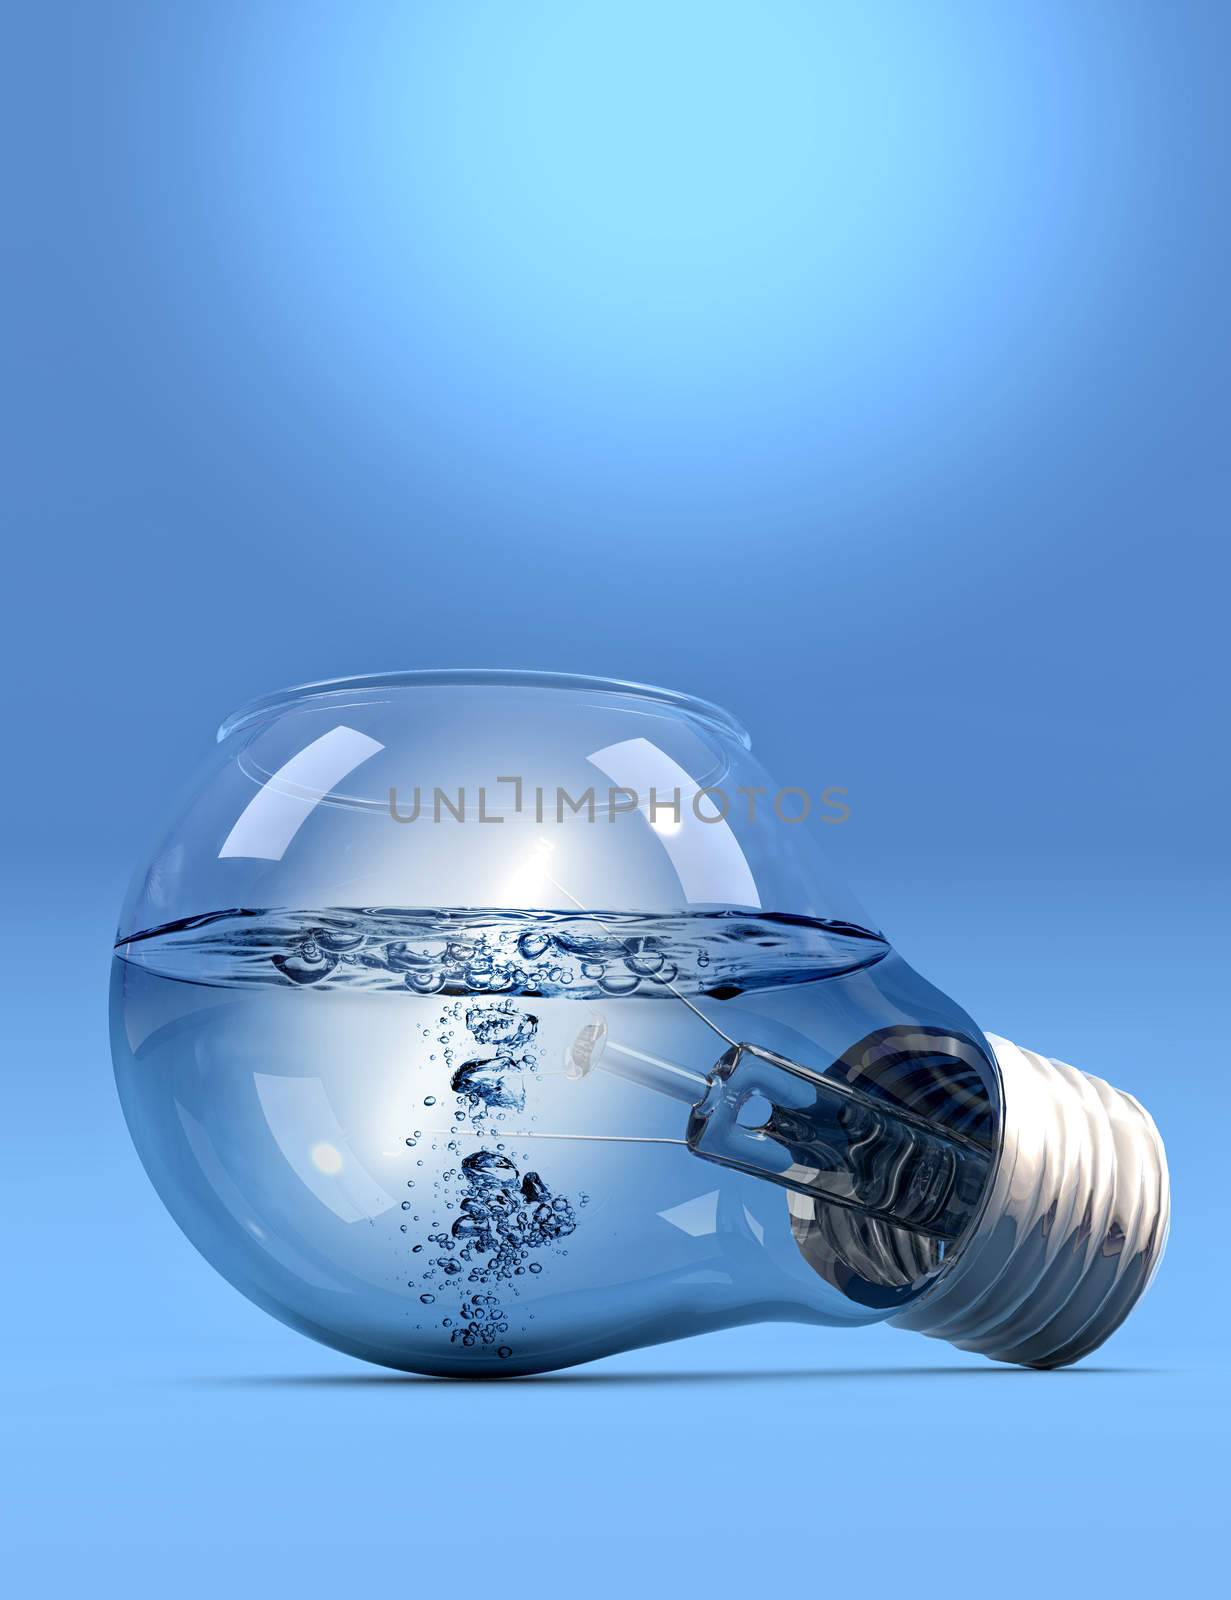 Incandescent light bulb filled with liquid on blue background